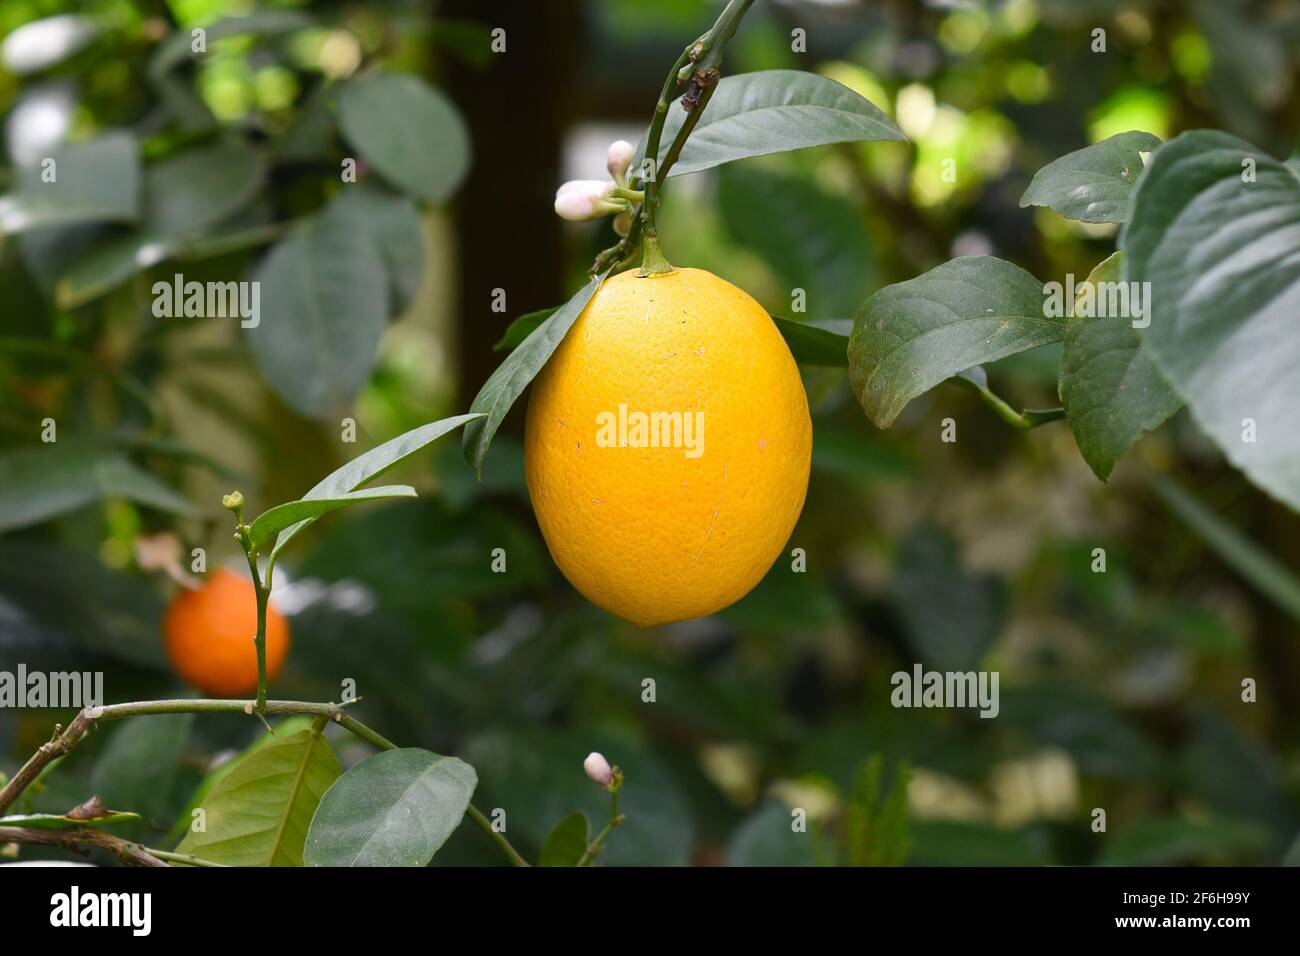 Kumquat or Citrus japonica fruit growing on a branch Stock Photo